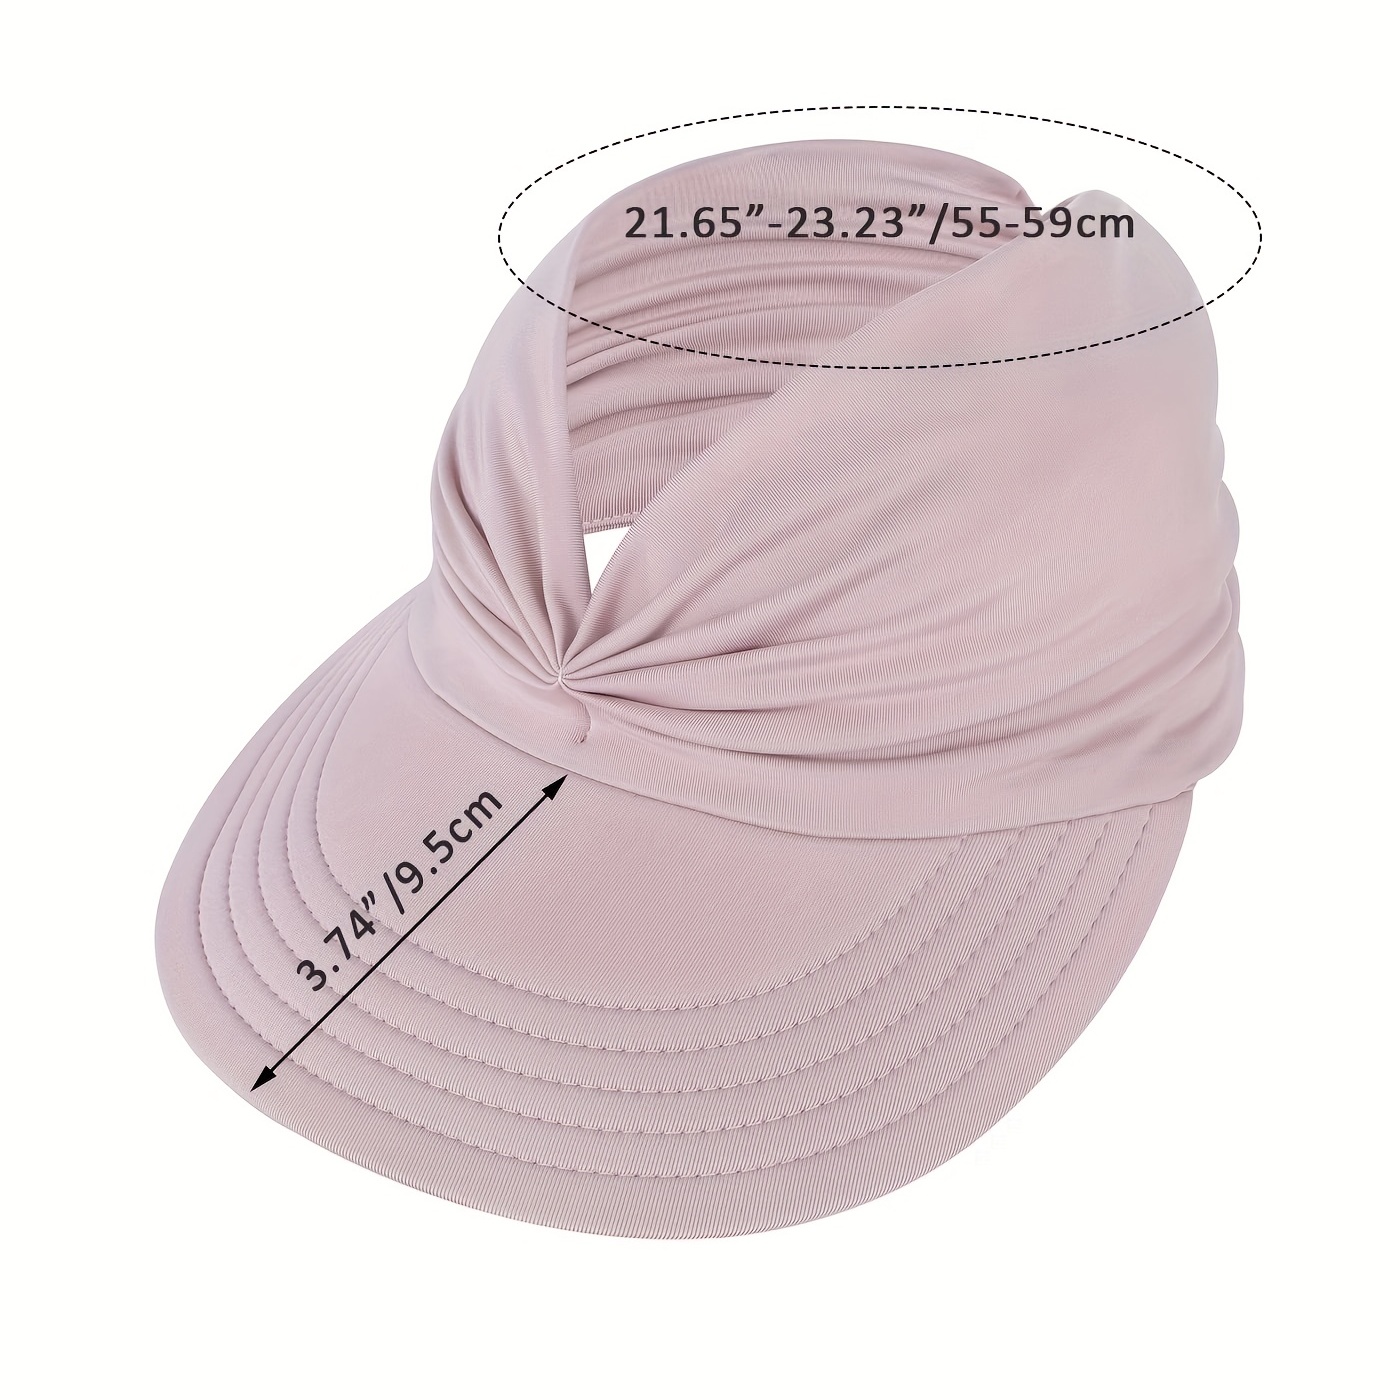 Extendable Wide Brim Visor Beach Hat For Women Ideal For Fishing,  Mountaineering, And Outdoor Activities UV Protected Visor And Empty Design  Perfect Gift DXAA From Lubanliu, $10.52